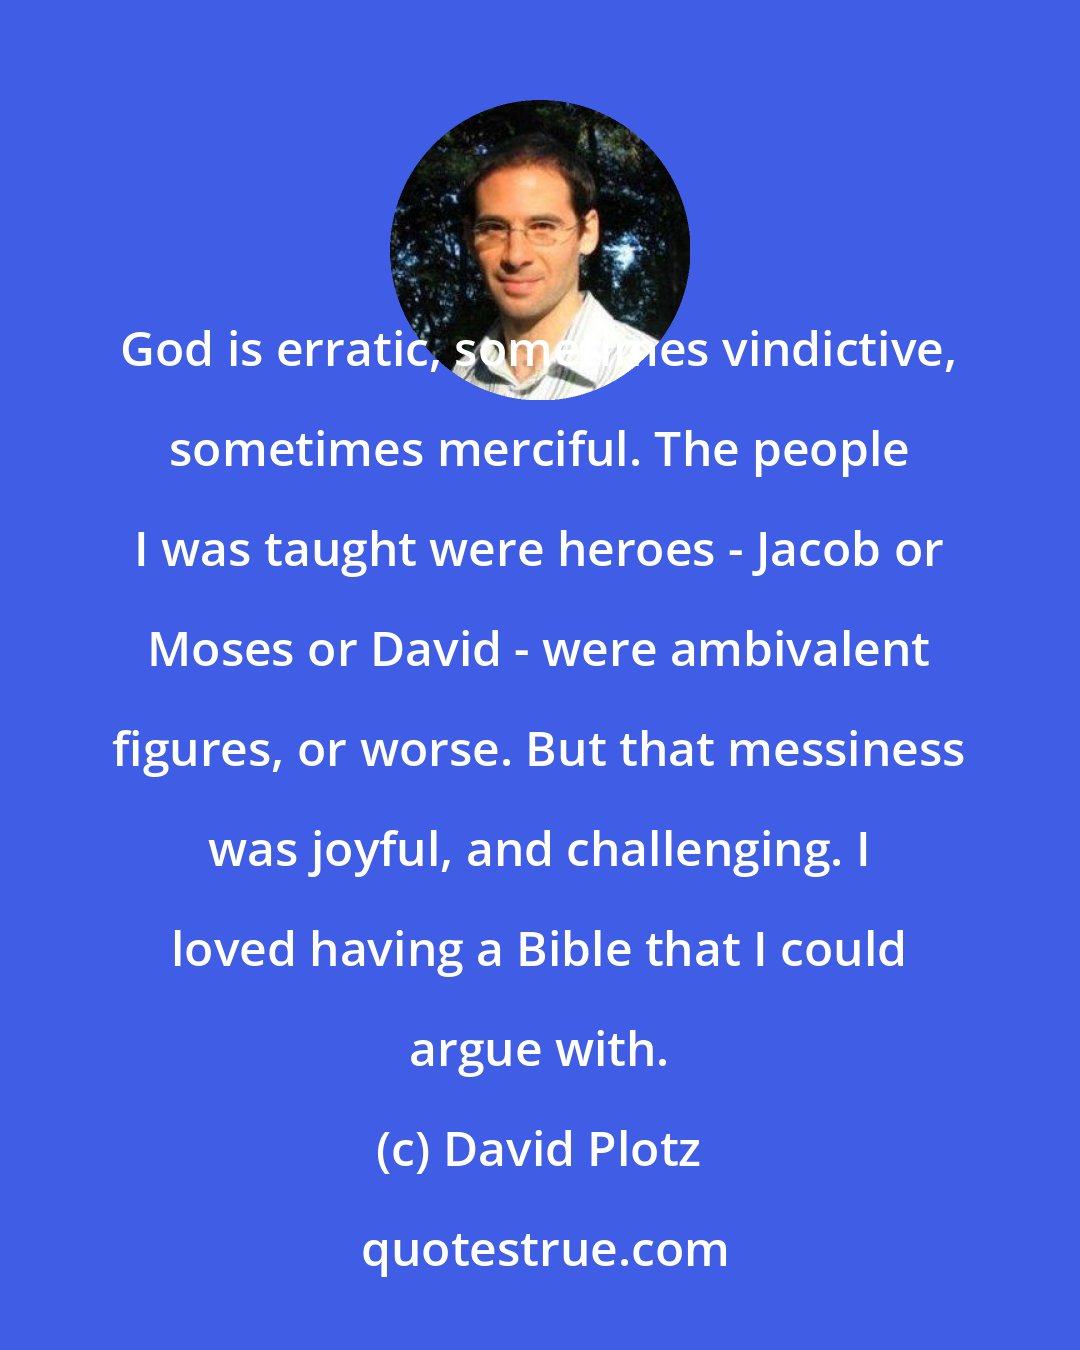 David Plotz: God is erratic, sometimes vindictive, sometimes merciful. The people I was taught were heroes - Jacob or Moses or David - were ambivalent figures, or worse. But that messiness was joyful, and challenging. I loved having a Bible that I could argue with.